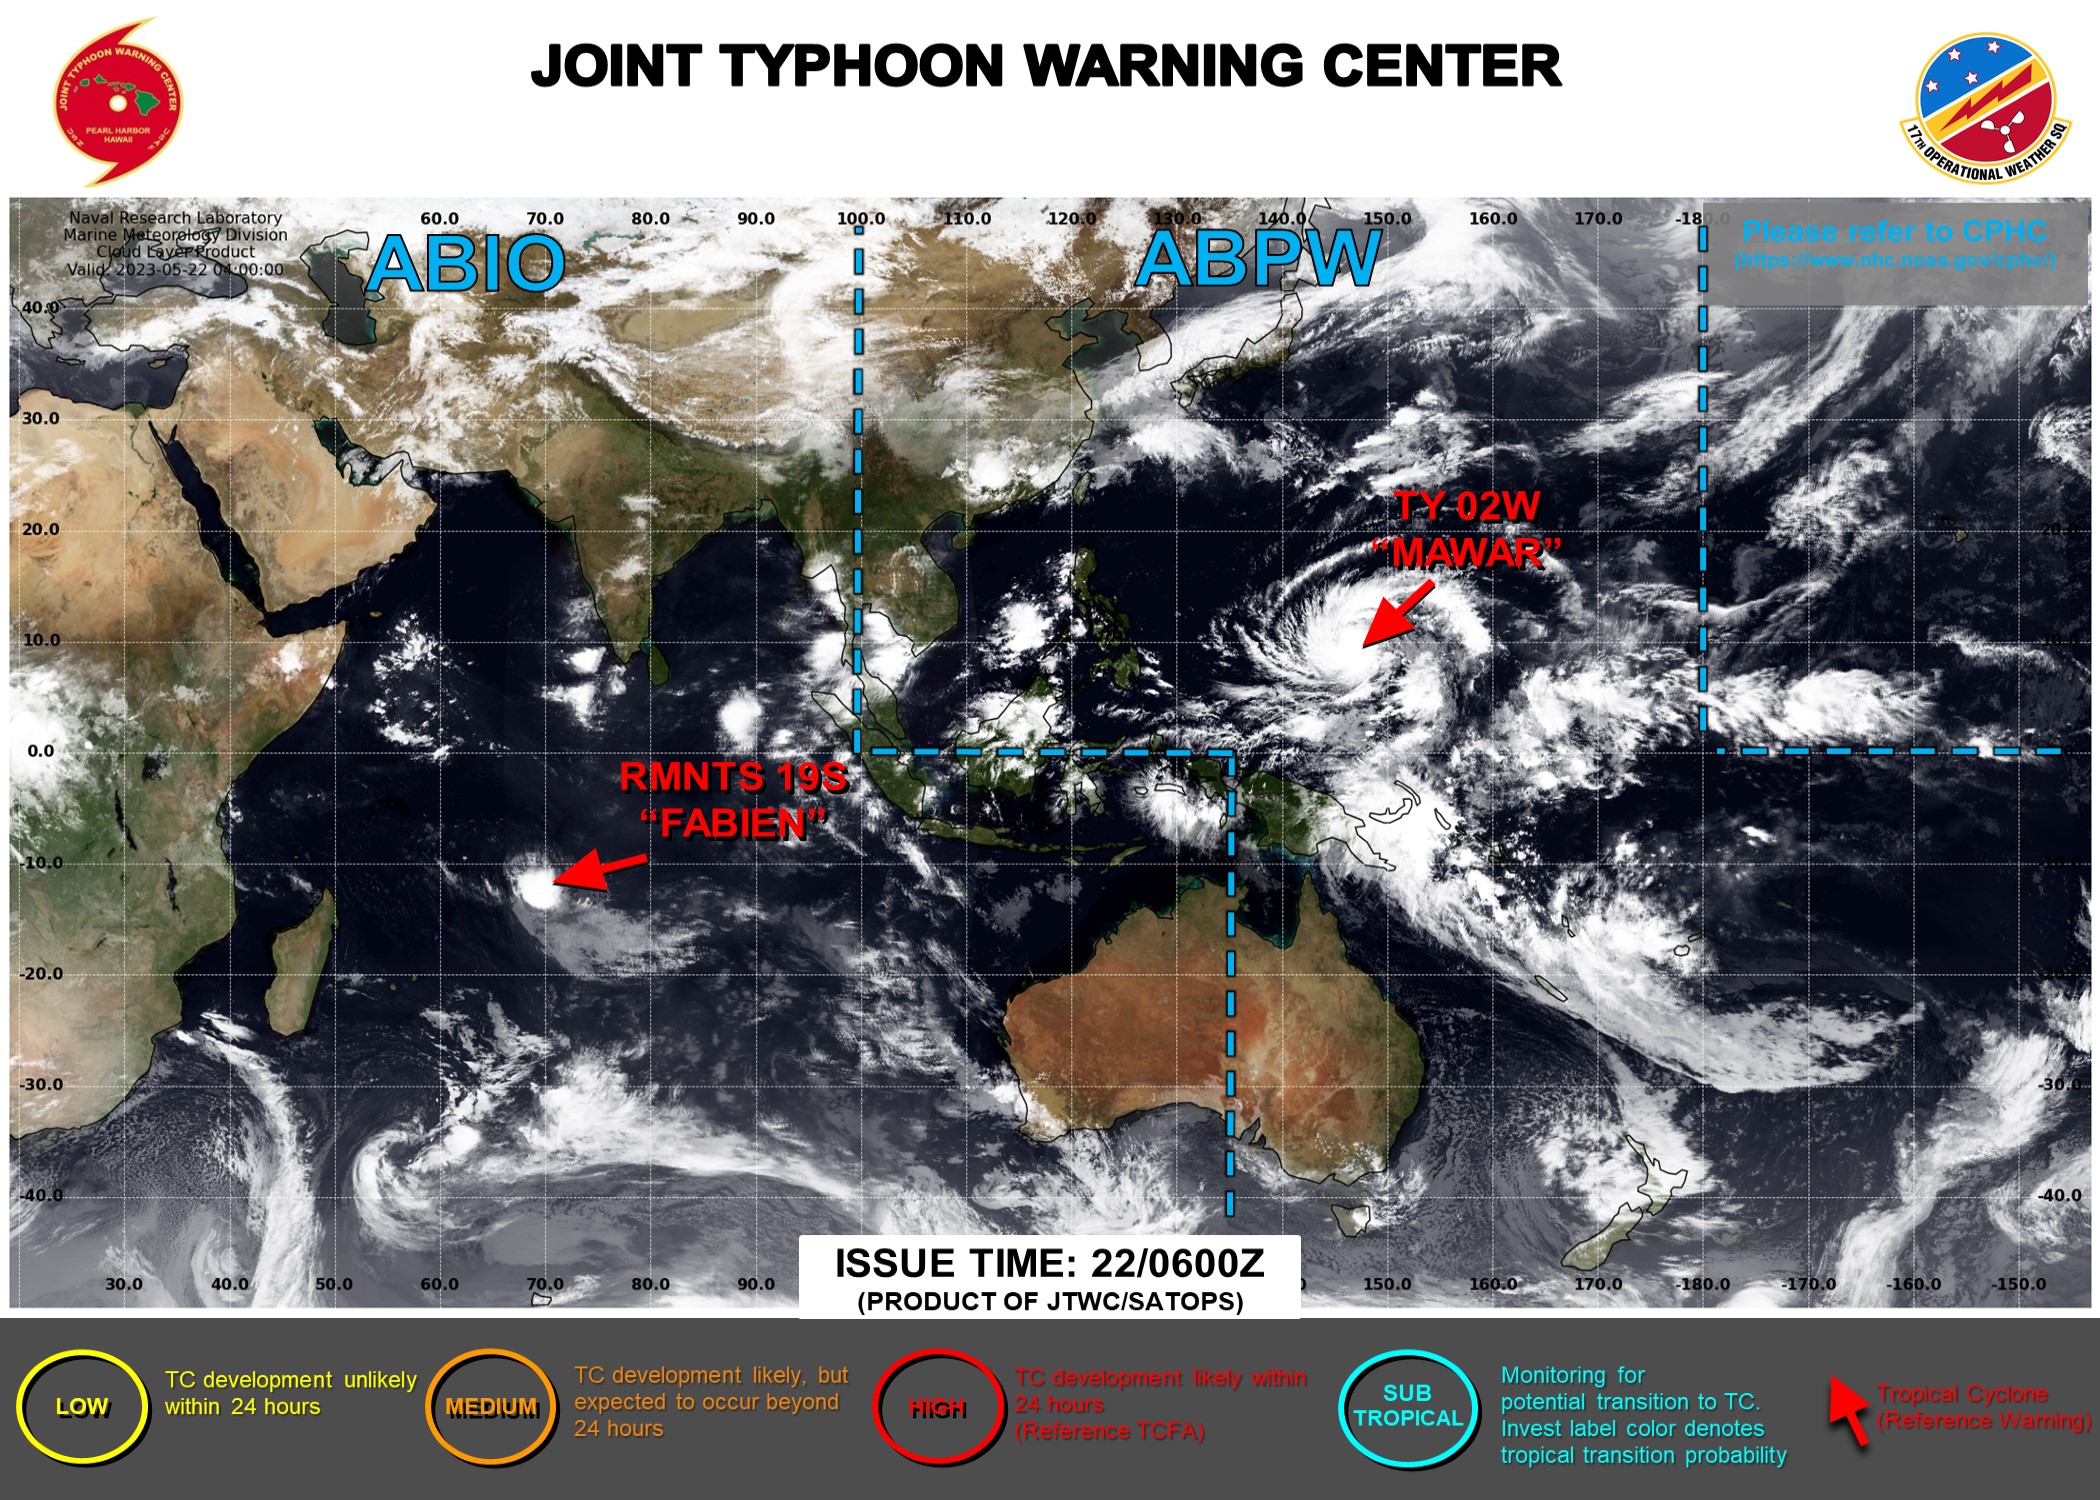 JTWC IS ISSUING 6HOURLY WARNINGS AND 3HOURLY SATELLITE BULLETINS ON TY 02W(MAWAR). 12HOURLY WARNINGS AND 3 HOURLY SATELLITE BULLETINS ON TC 19S(FABIEN) WERE DISCONTINUED AT 212100UTC AND 220530UTC RESPECTIVELY.